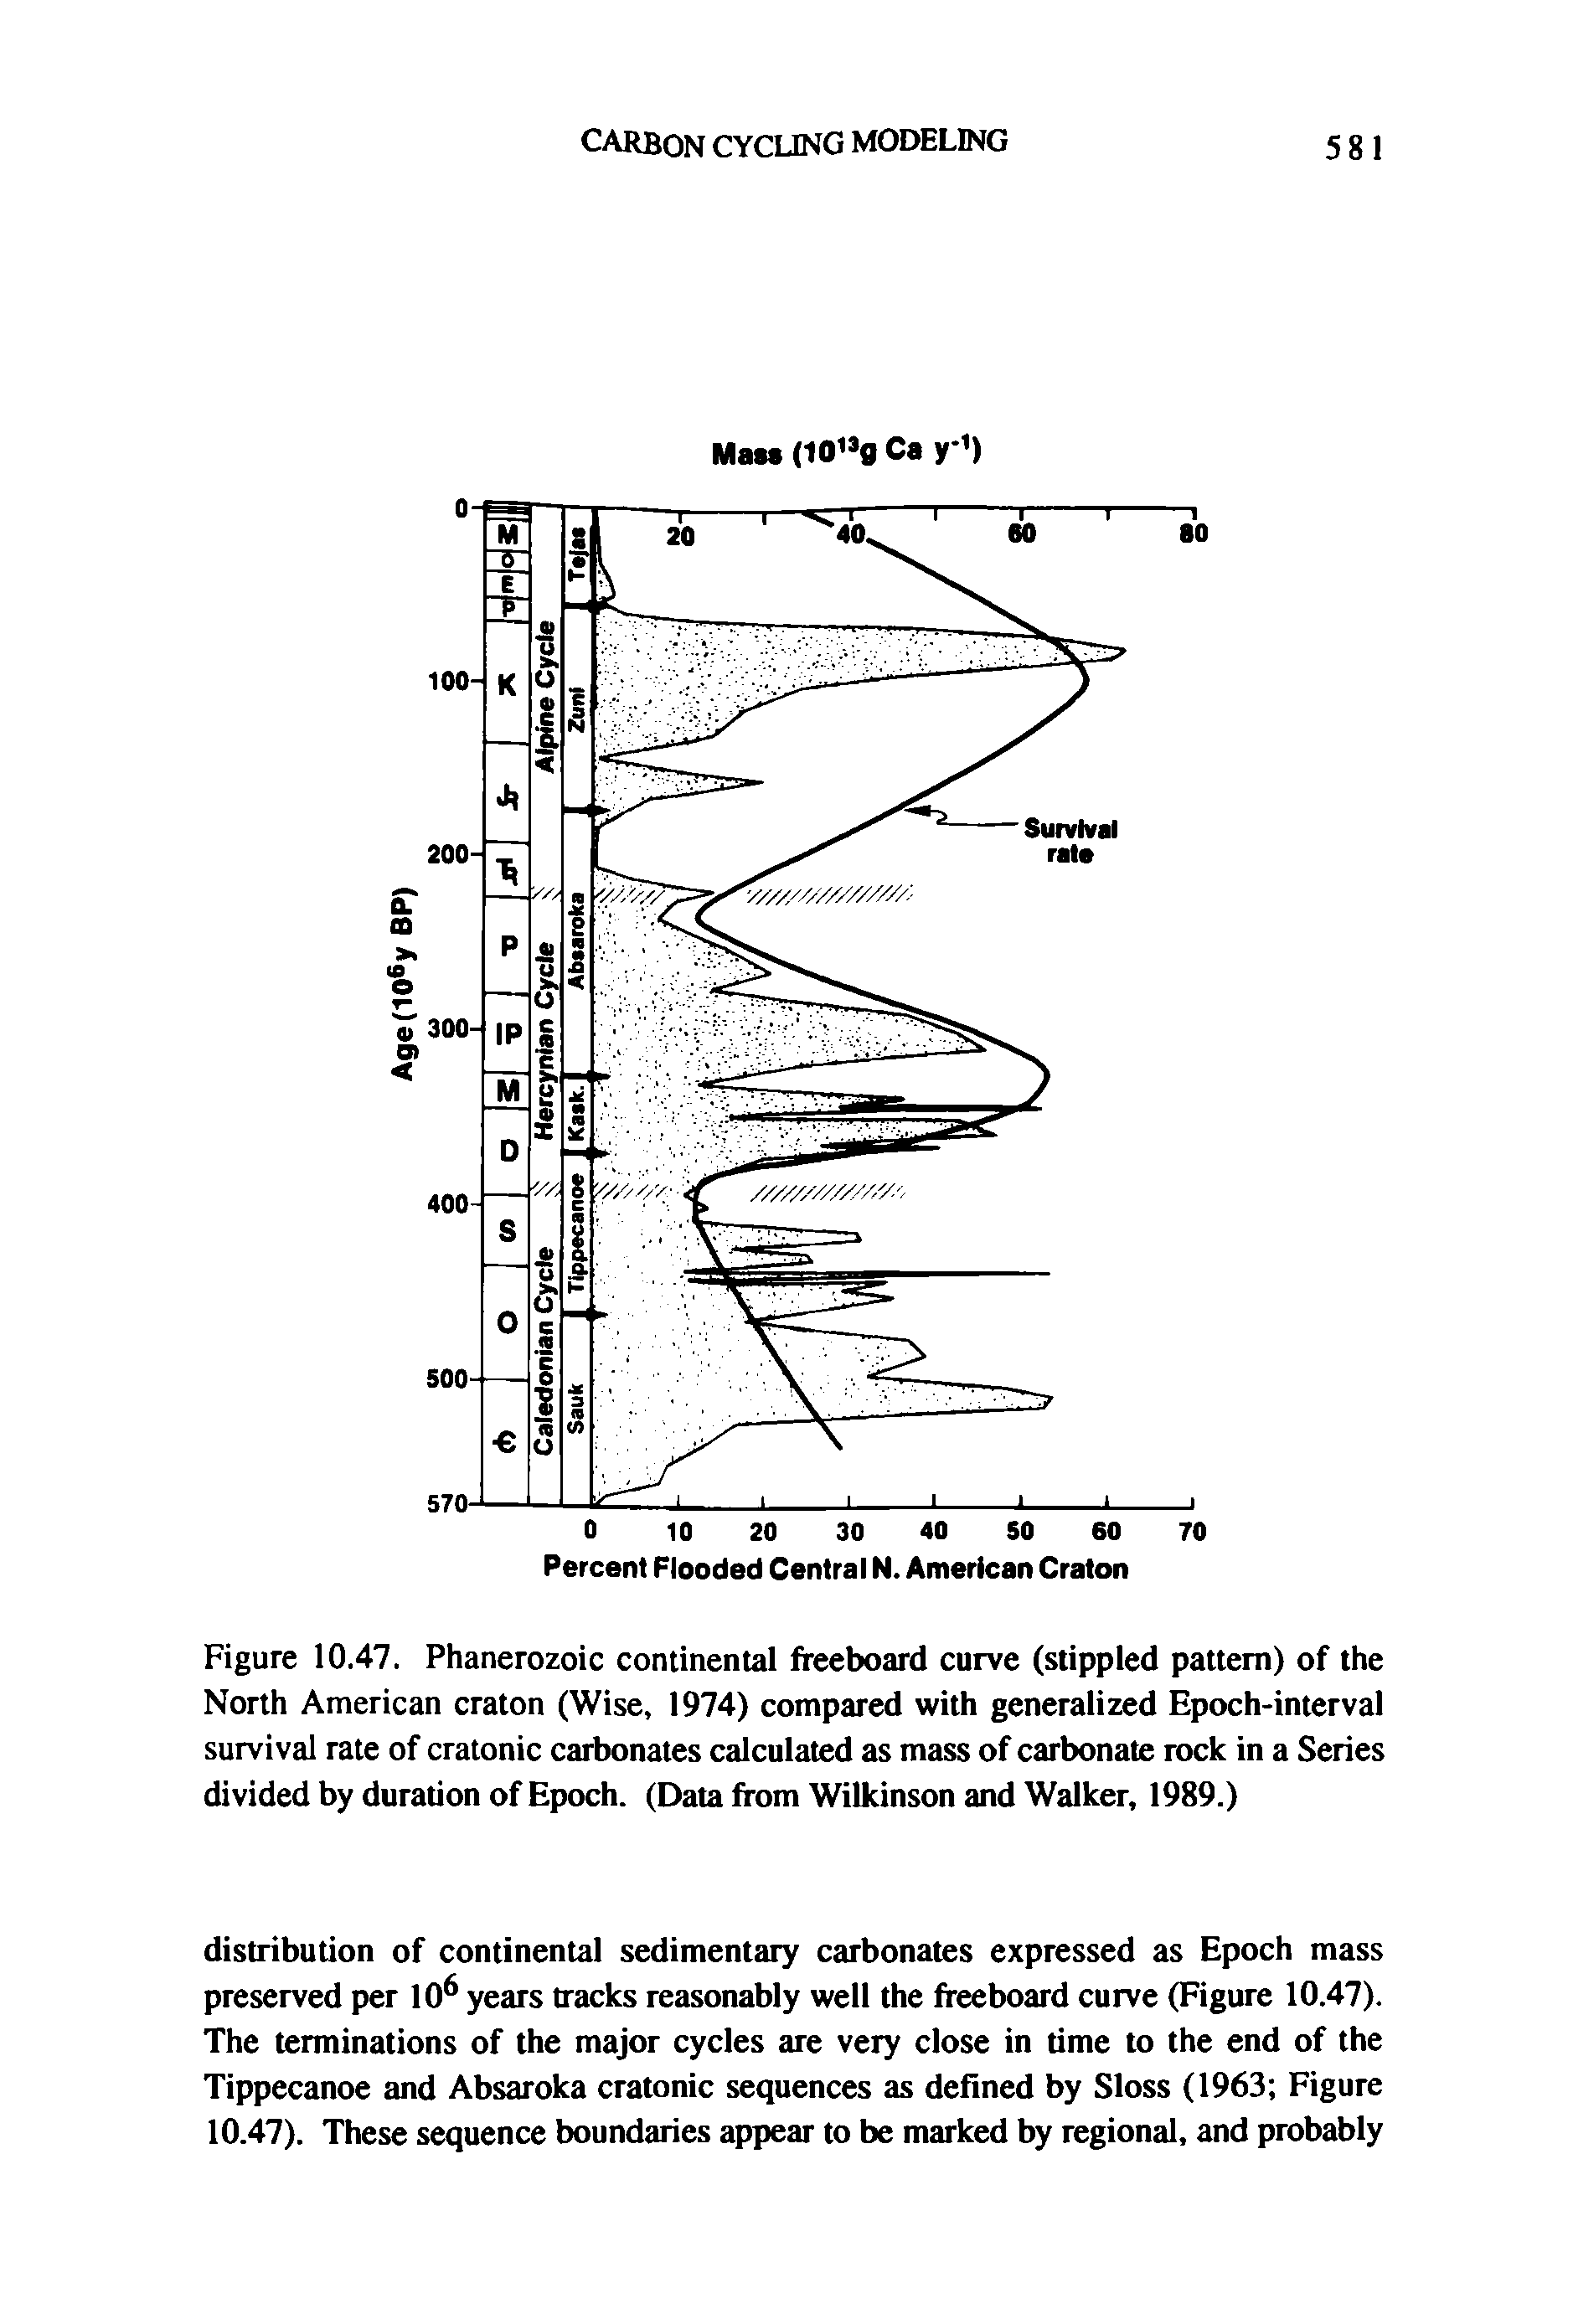 Figure 10.47. Phanerozoic continental freeboard curve (stippled pattern) of the North American craton (Wise, 1974) compared with generalized Epoch-interval survival rate of cratonic carbonates calculated as mass of carbonate rock in a Series divided by duration of Epoch. (Data from Wilkinson and Walker, 1989.)...